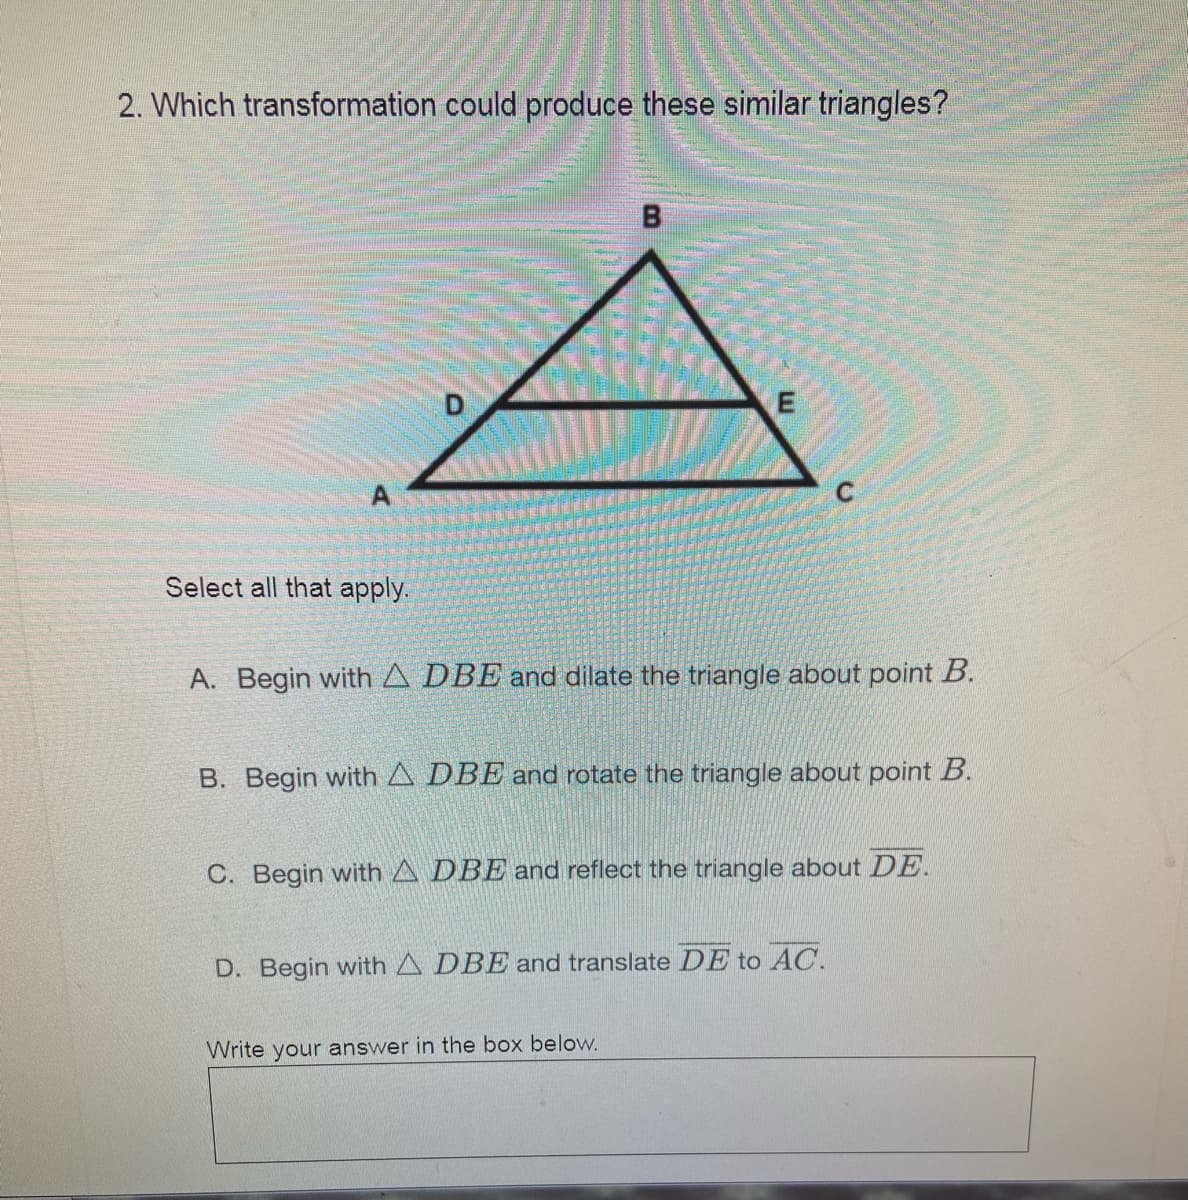 2. Which transformation could produce these similar triangles?
D
Select all that apply.
A. Begin with A DBE and dilate the triangle about point B.
B. Begin with A DBE and rotate the triangle about point B.
C. Begin with A DBE and reflect the triangle about DE.
D. Begin with A DBE and translate DE to AC.
Write your answer in the box below.
